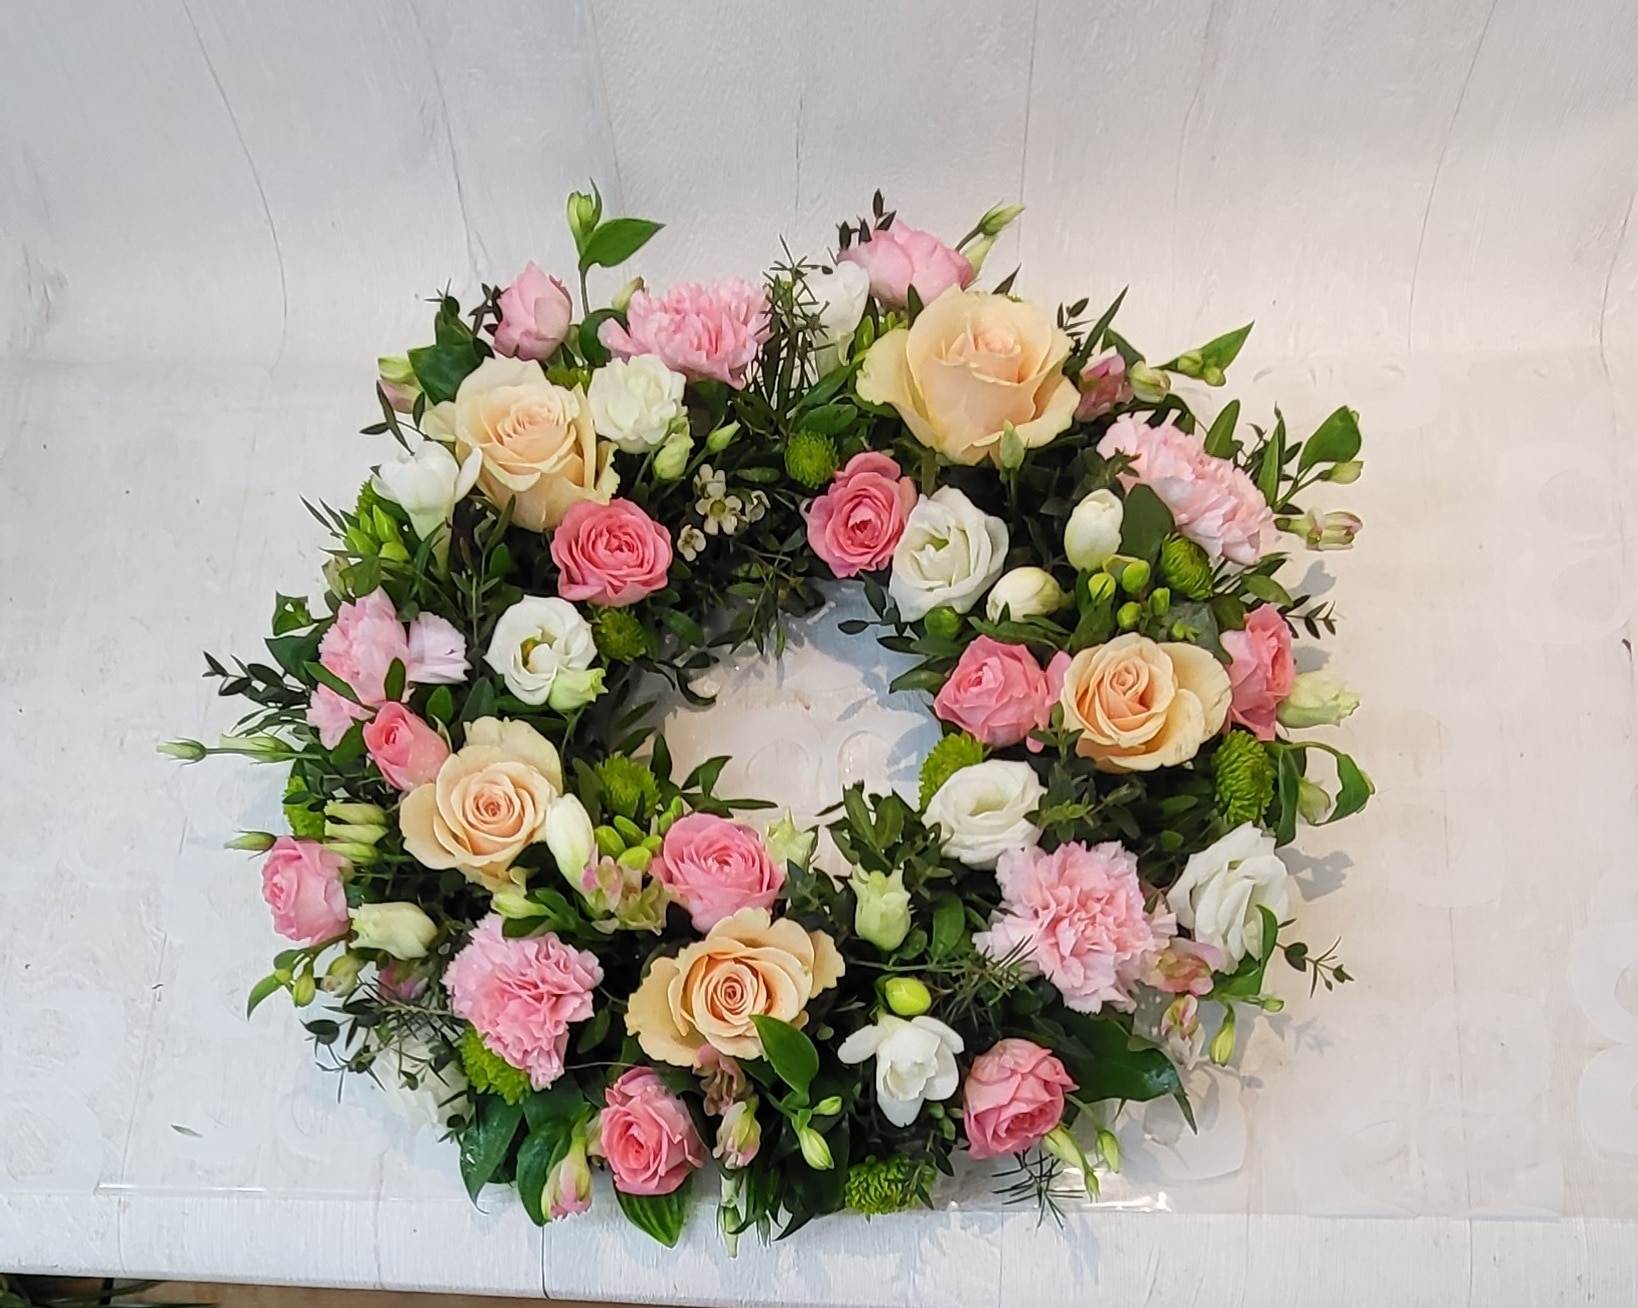 Pretty Pastel Wreath with Roses Funeral Arrangement